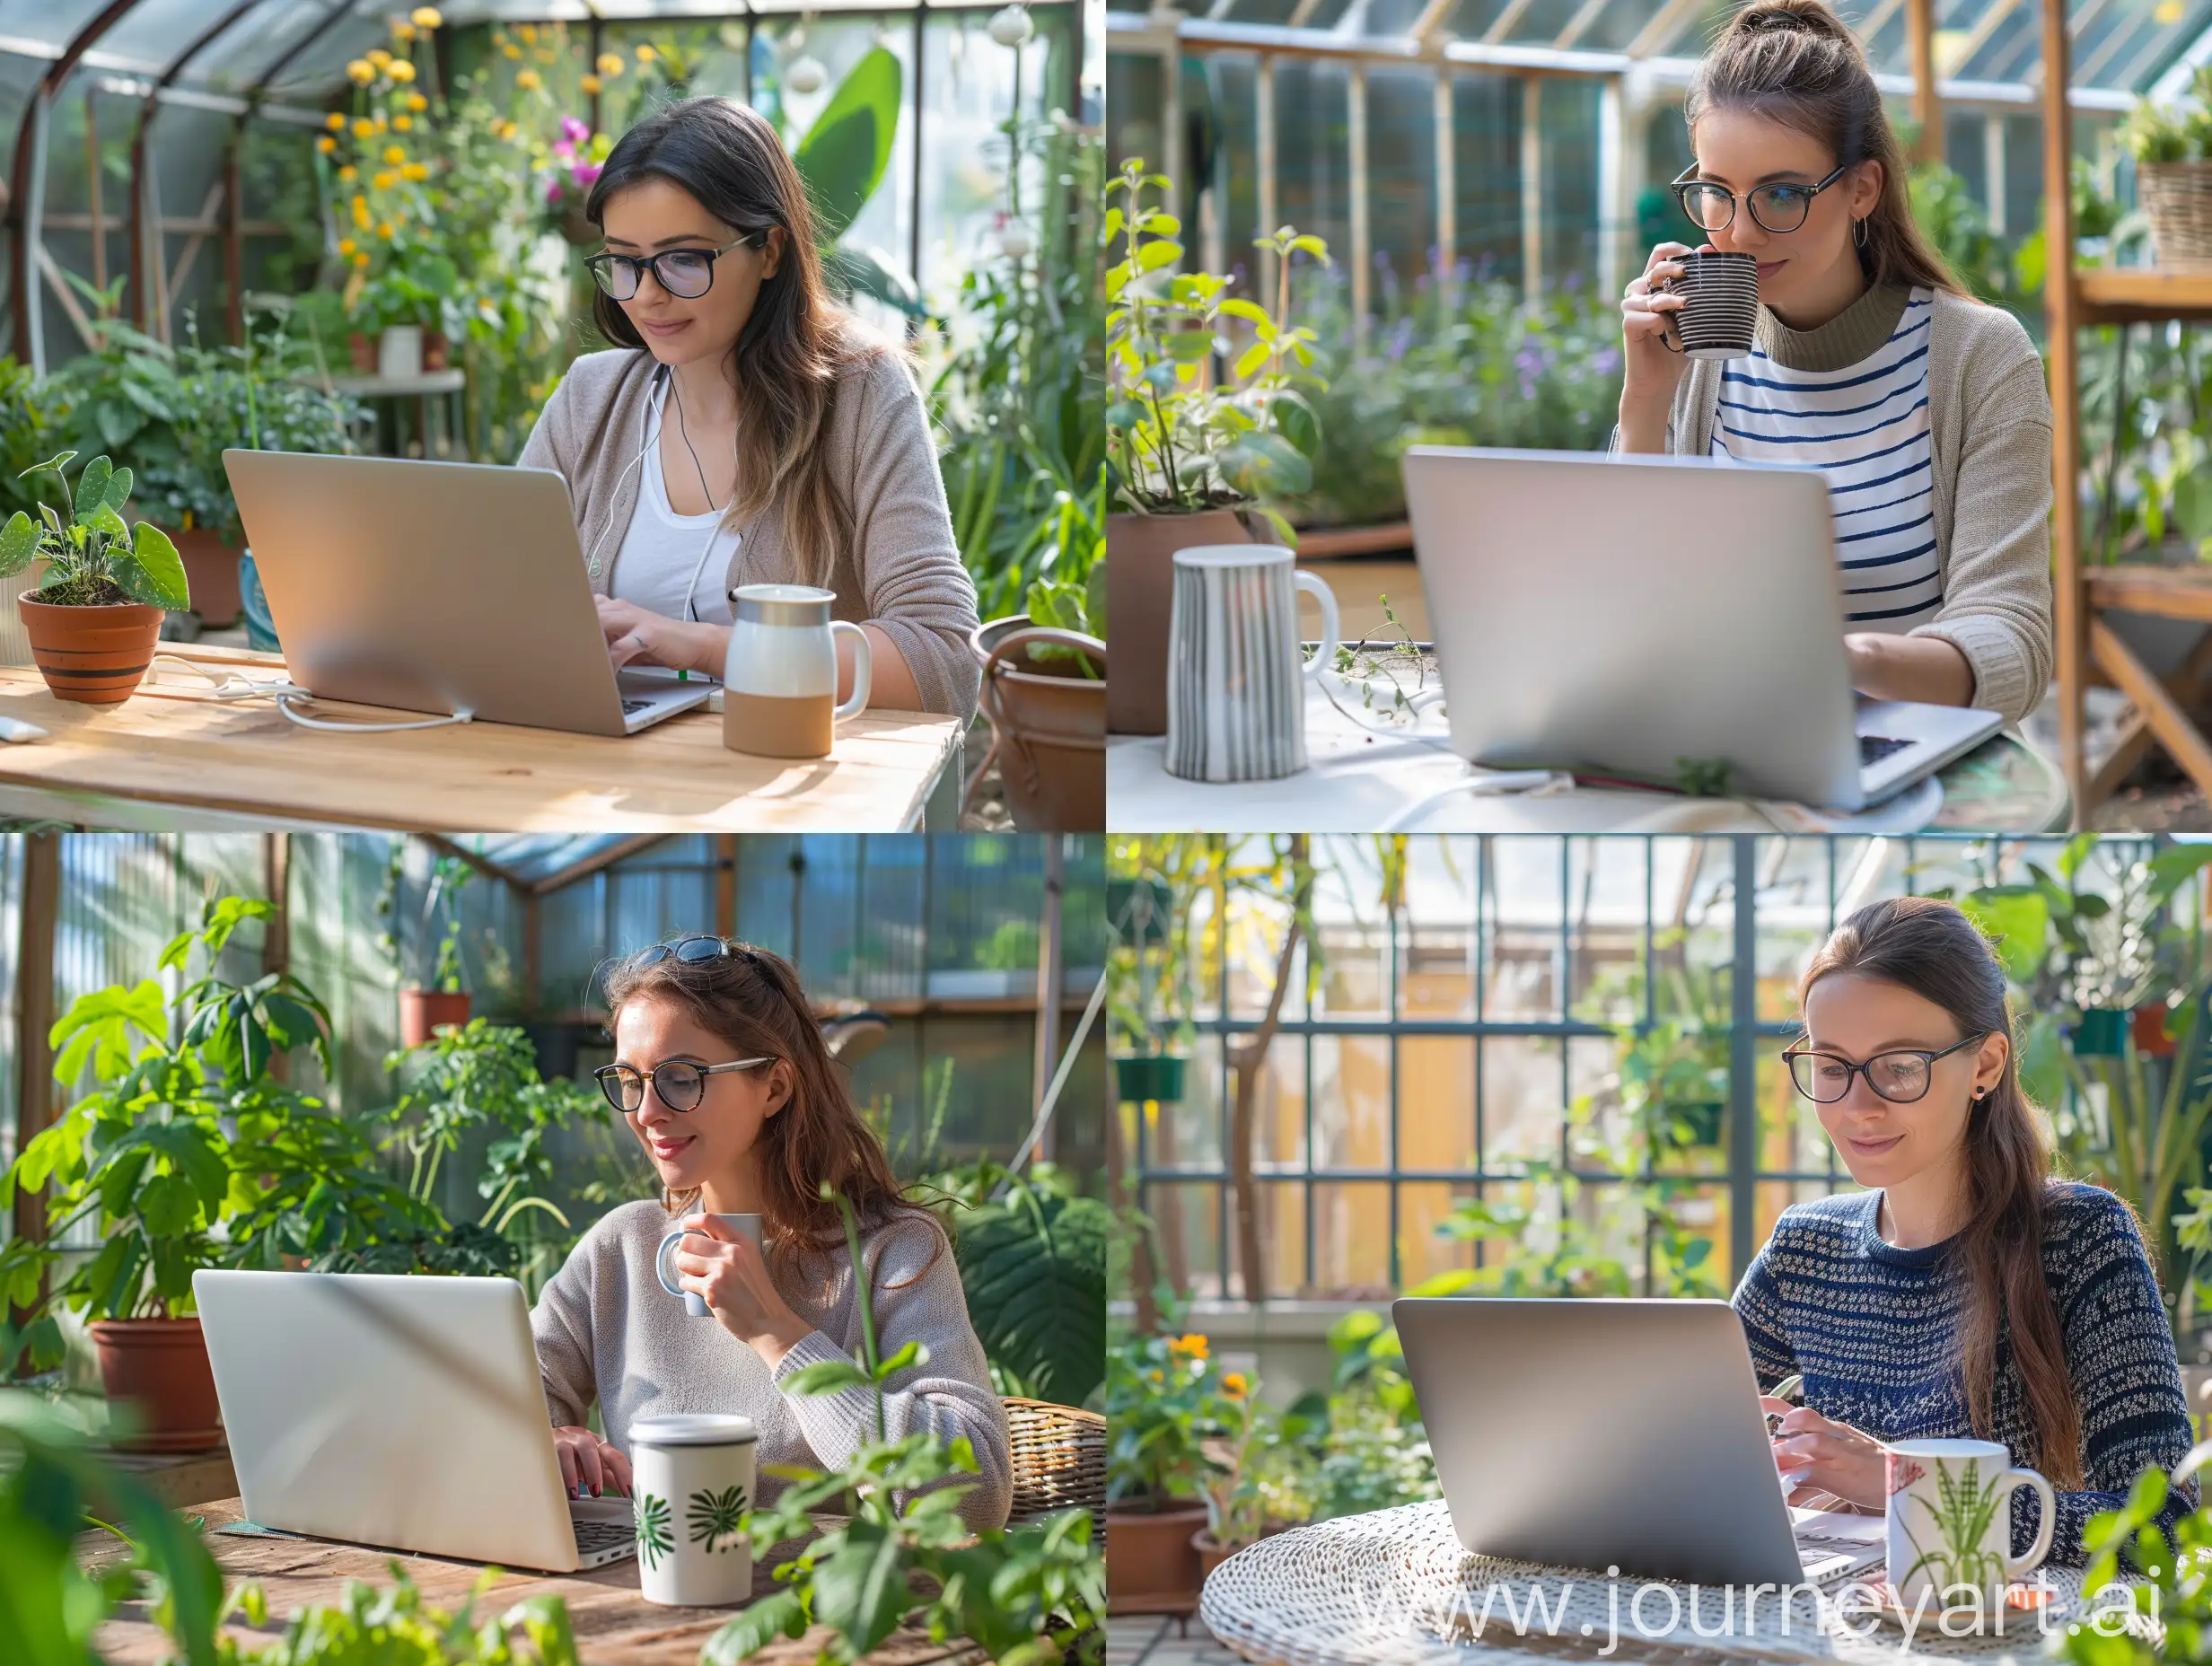 Young female gardener in glasses using laptop, communicating on internet with customer in home garden/greenhouse, reusable coffee/tea mug on table. Office workplace, remote work, E learning concept 